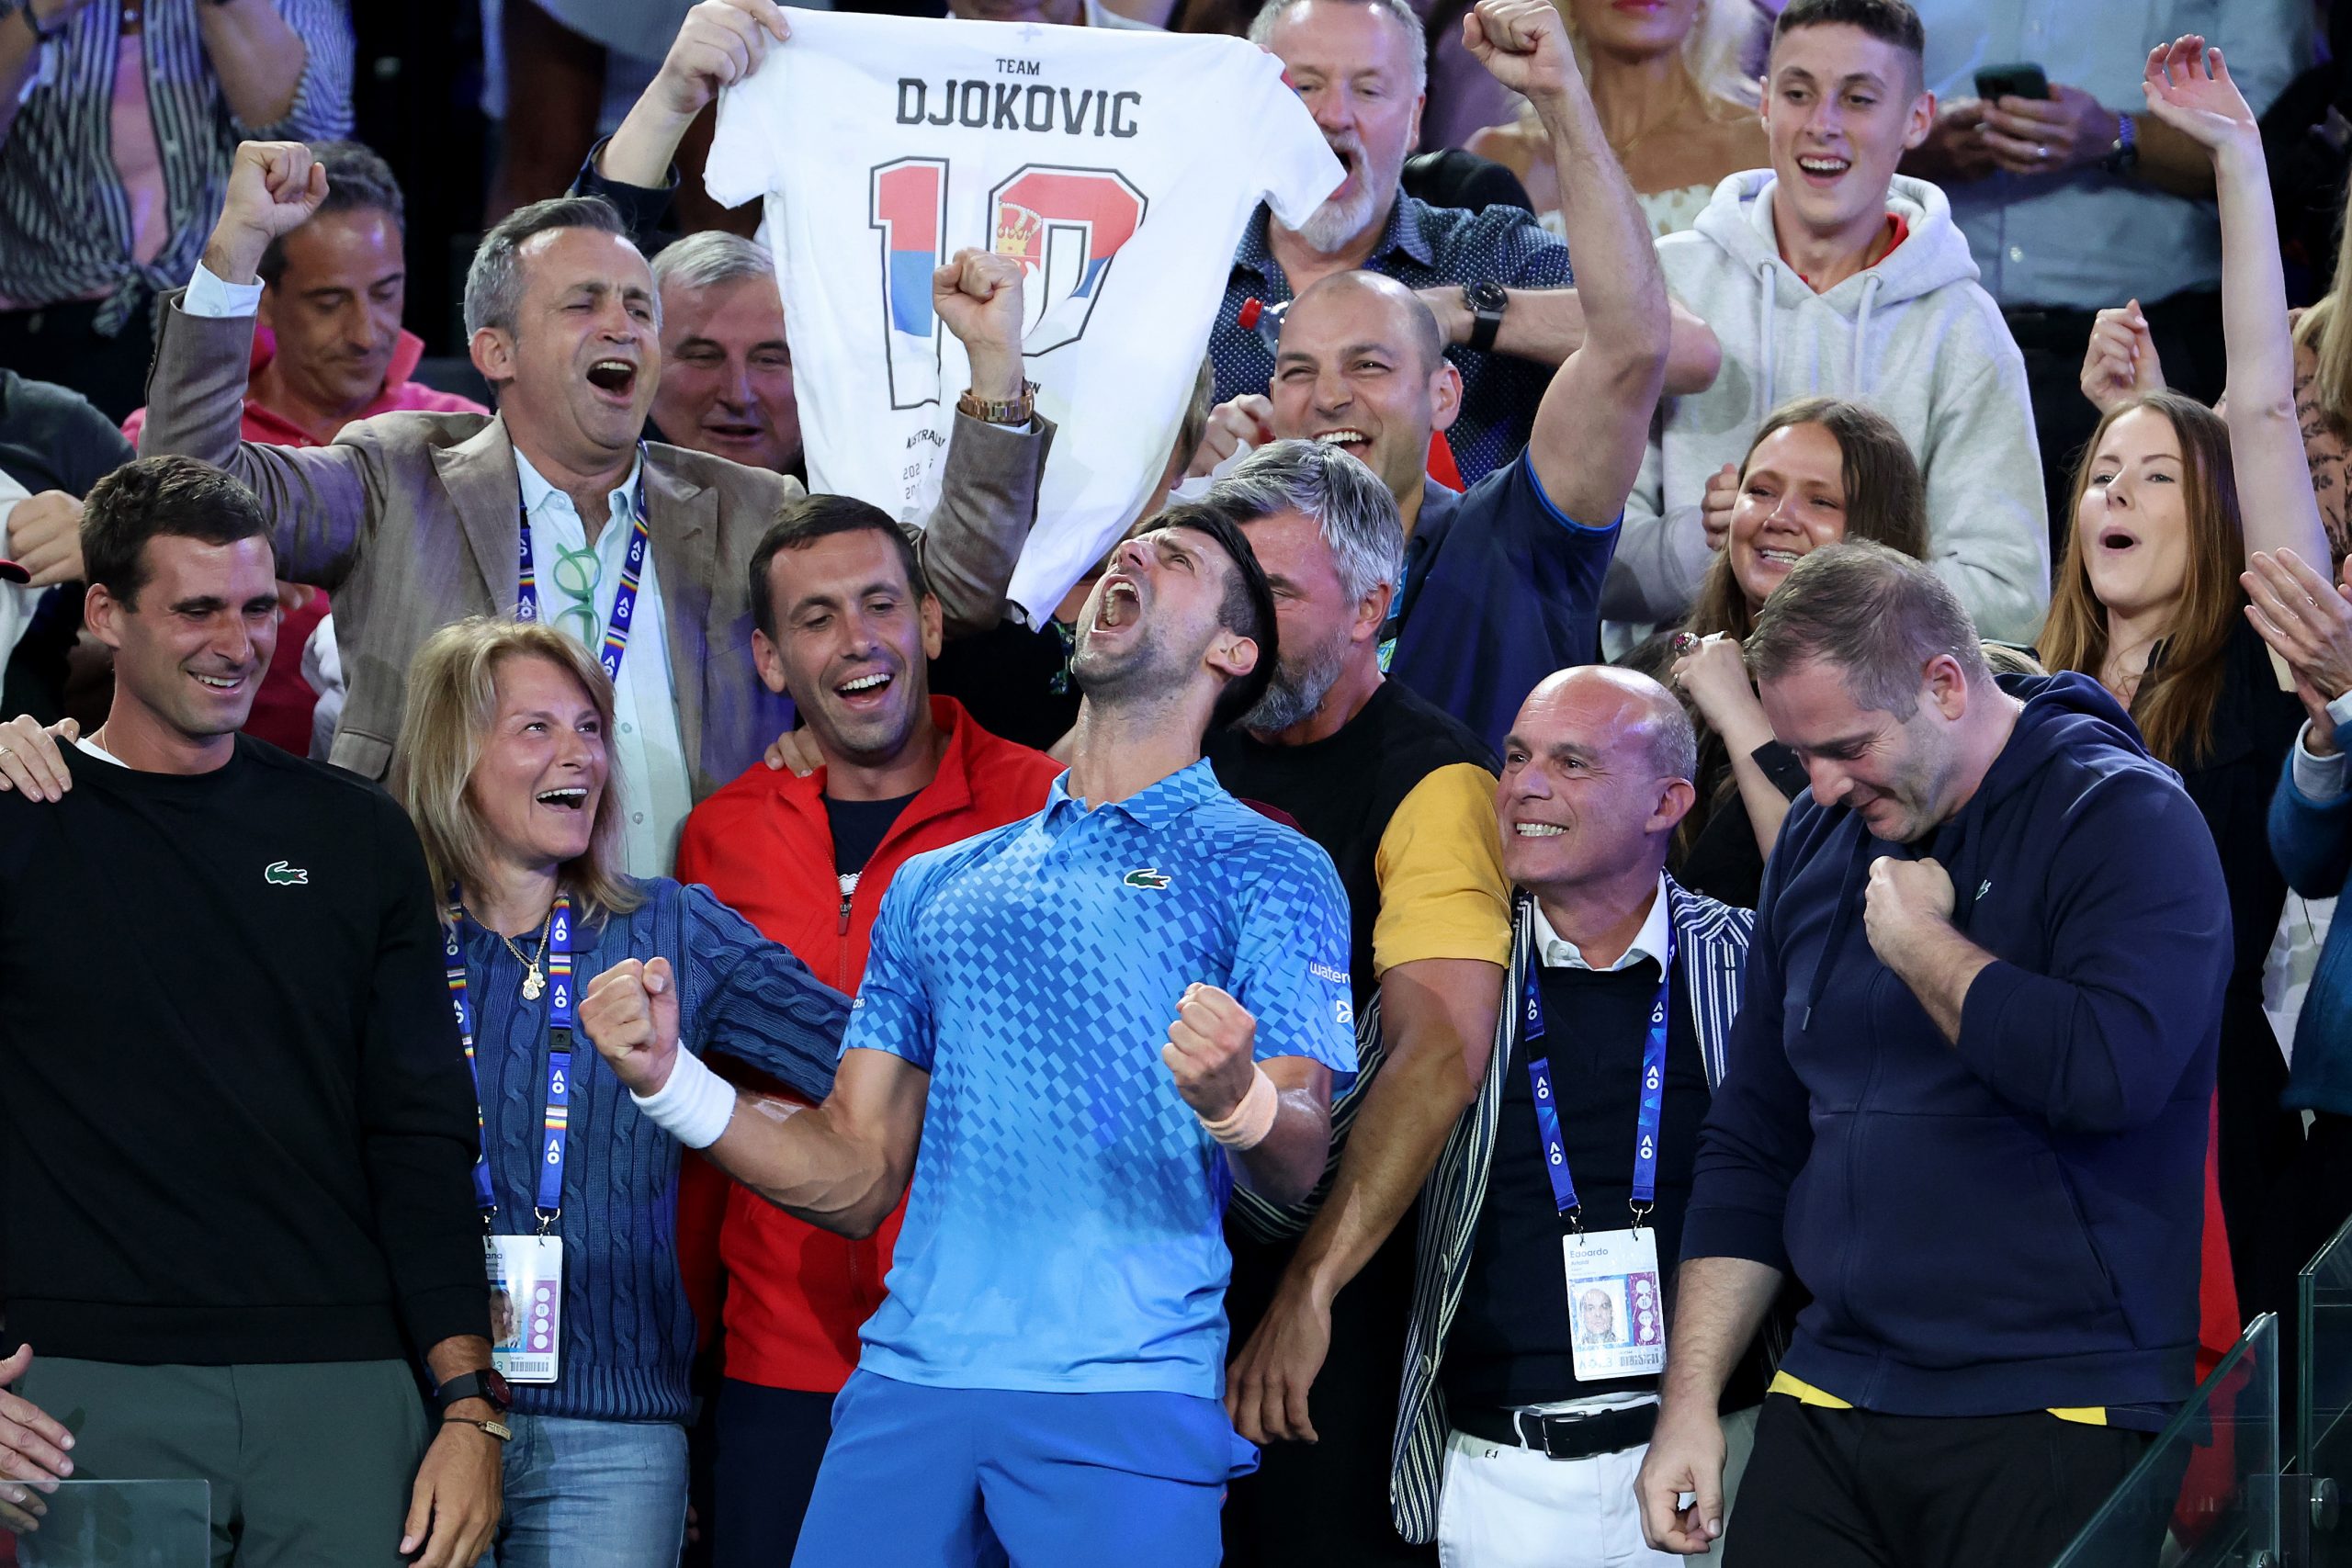 Novak Djokovic of Serbia celebrates winning championship point with Dijana Djokovic, Goran Ivanisevic and his player box in the Mens Singles Final against Stefanos Tsitsipas of Greece during day 14 of the 2023 Australian Open at Melbourne Park on January 29, 2023 in Melbourne, Australia. (Photo by Lintao Zhang/Getty Images)